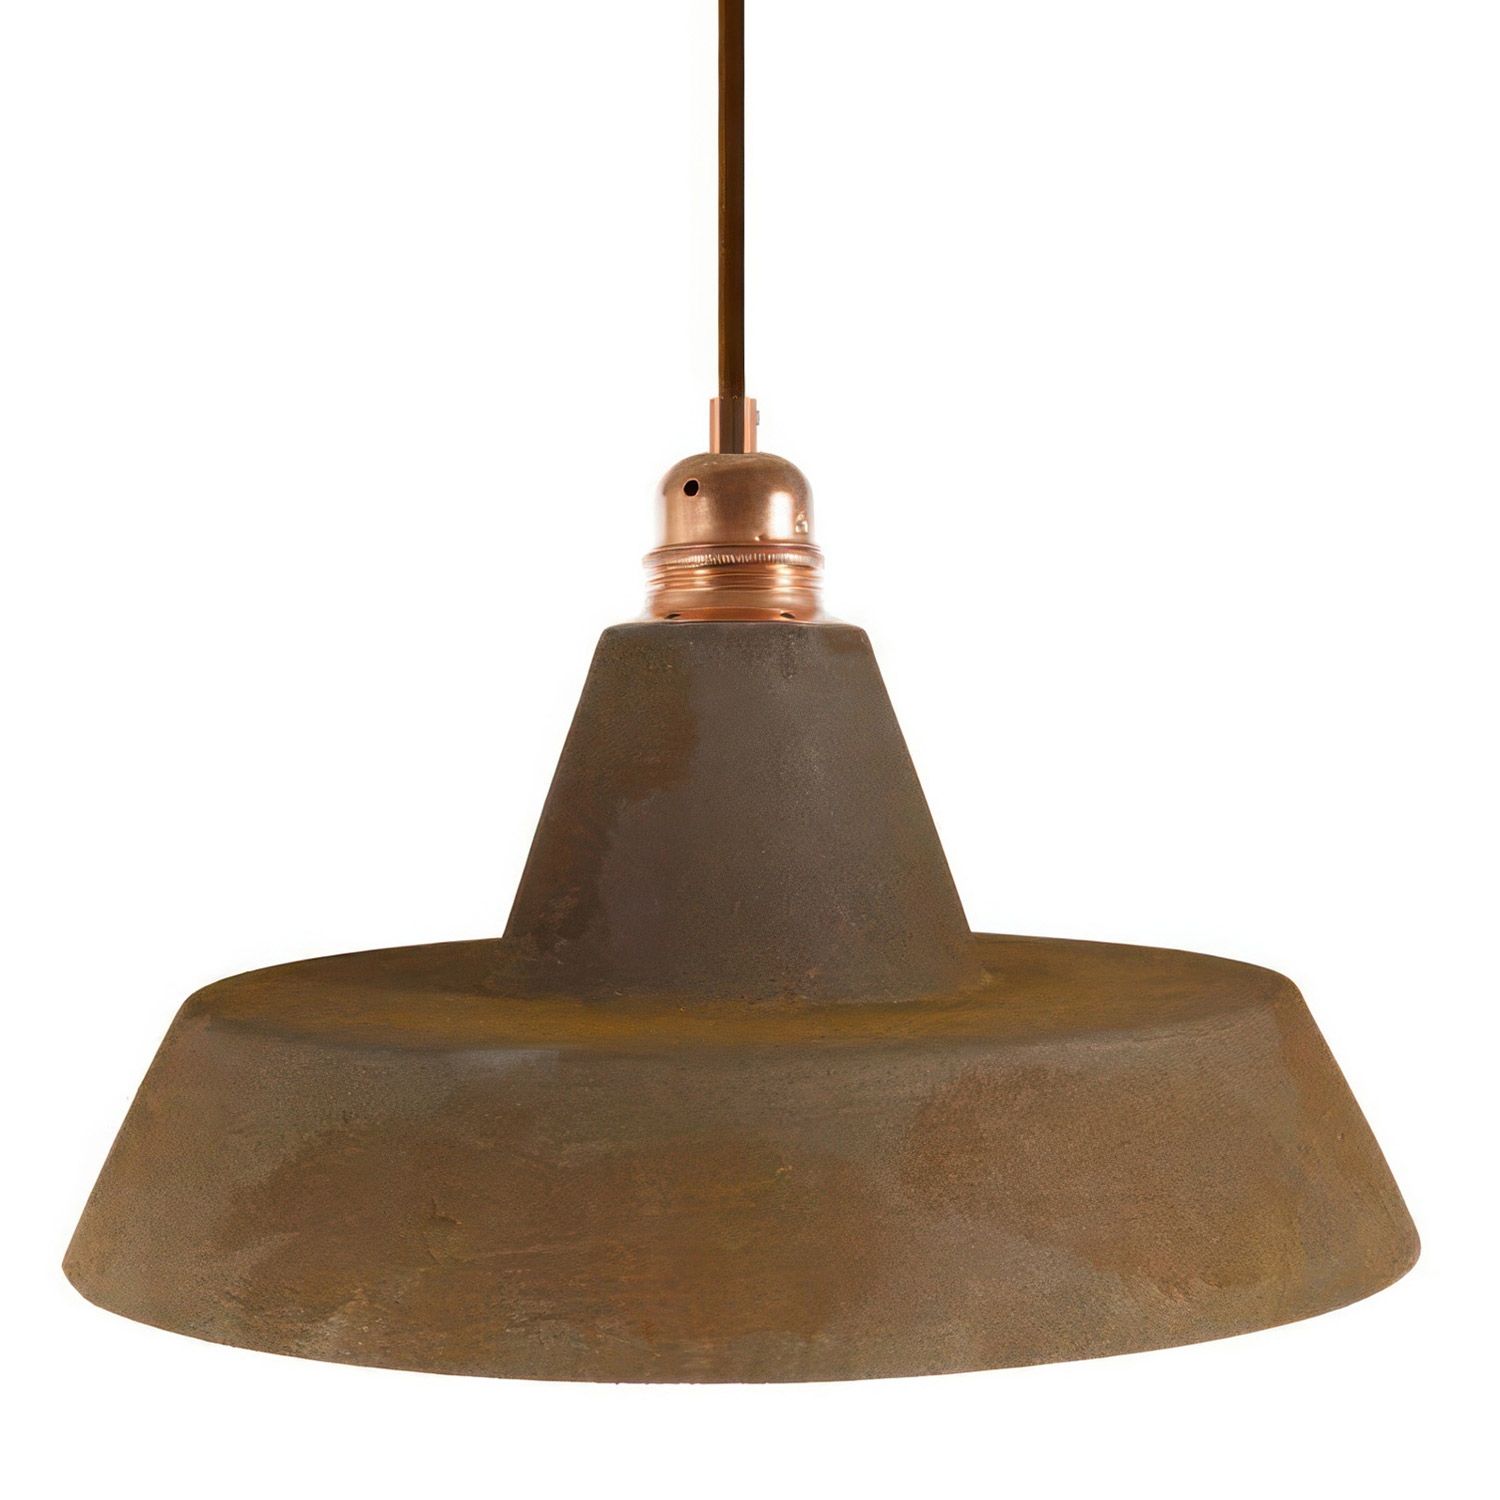 Pendant lamp with textile cable, Industrial ceramic lampshade and metal finishes - Made in Italy